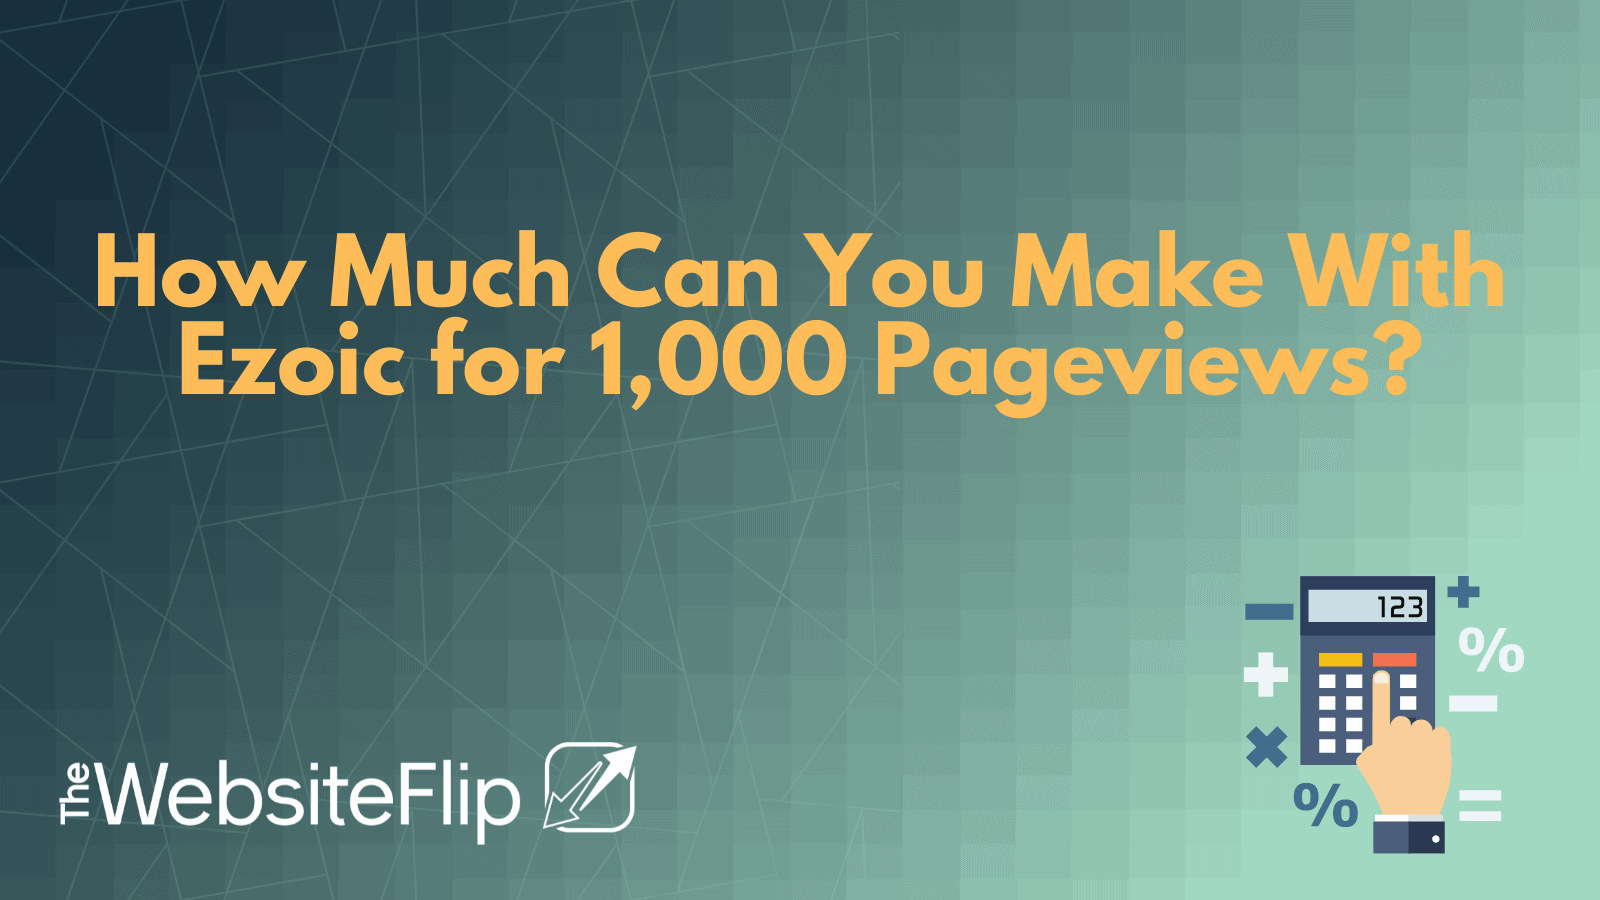 How Much Can You Make With Ezoic for 1,000 Pageviews